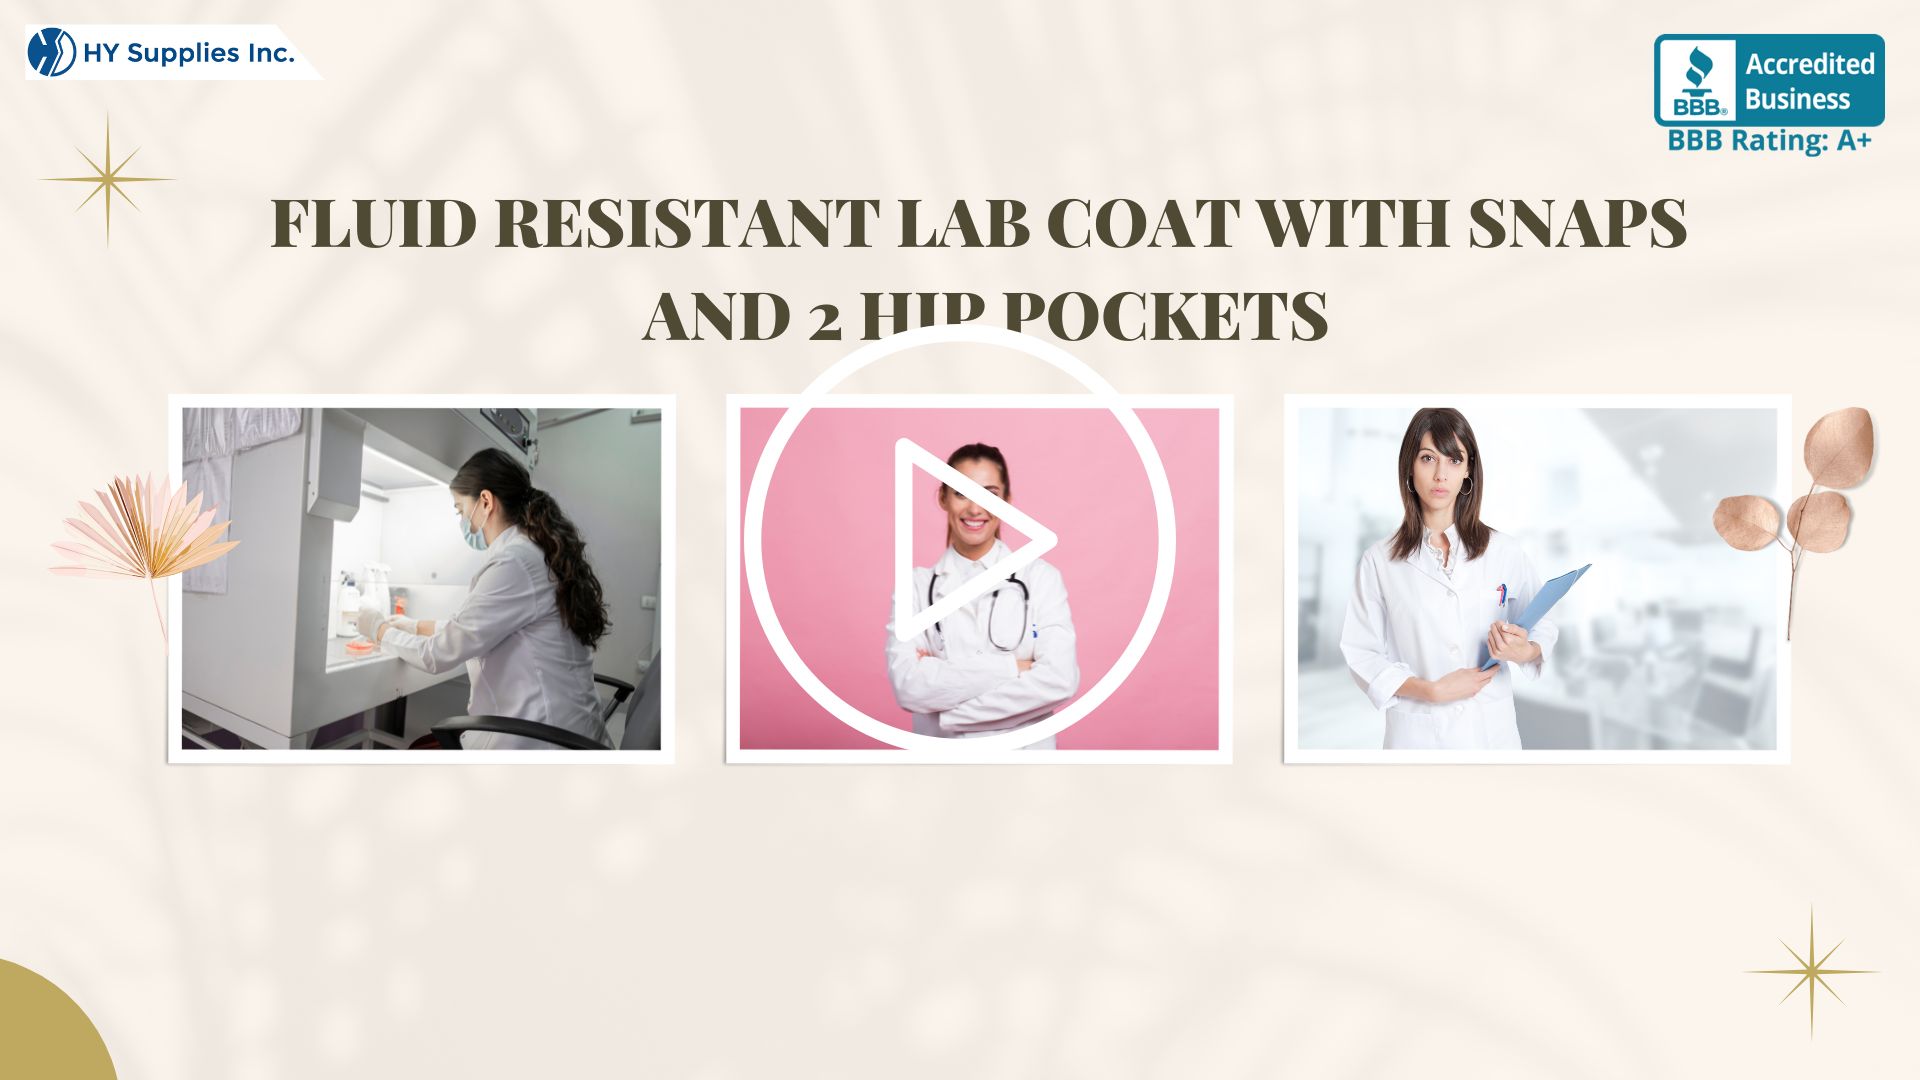 FLUID RESISTANT LAB COAT WITH SNAPS AND 2 HIP POCKETS